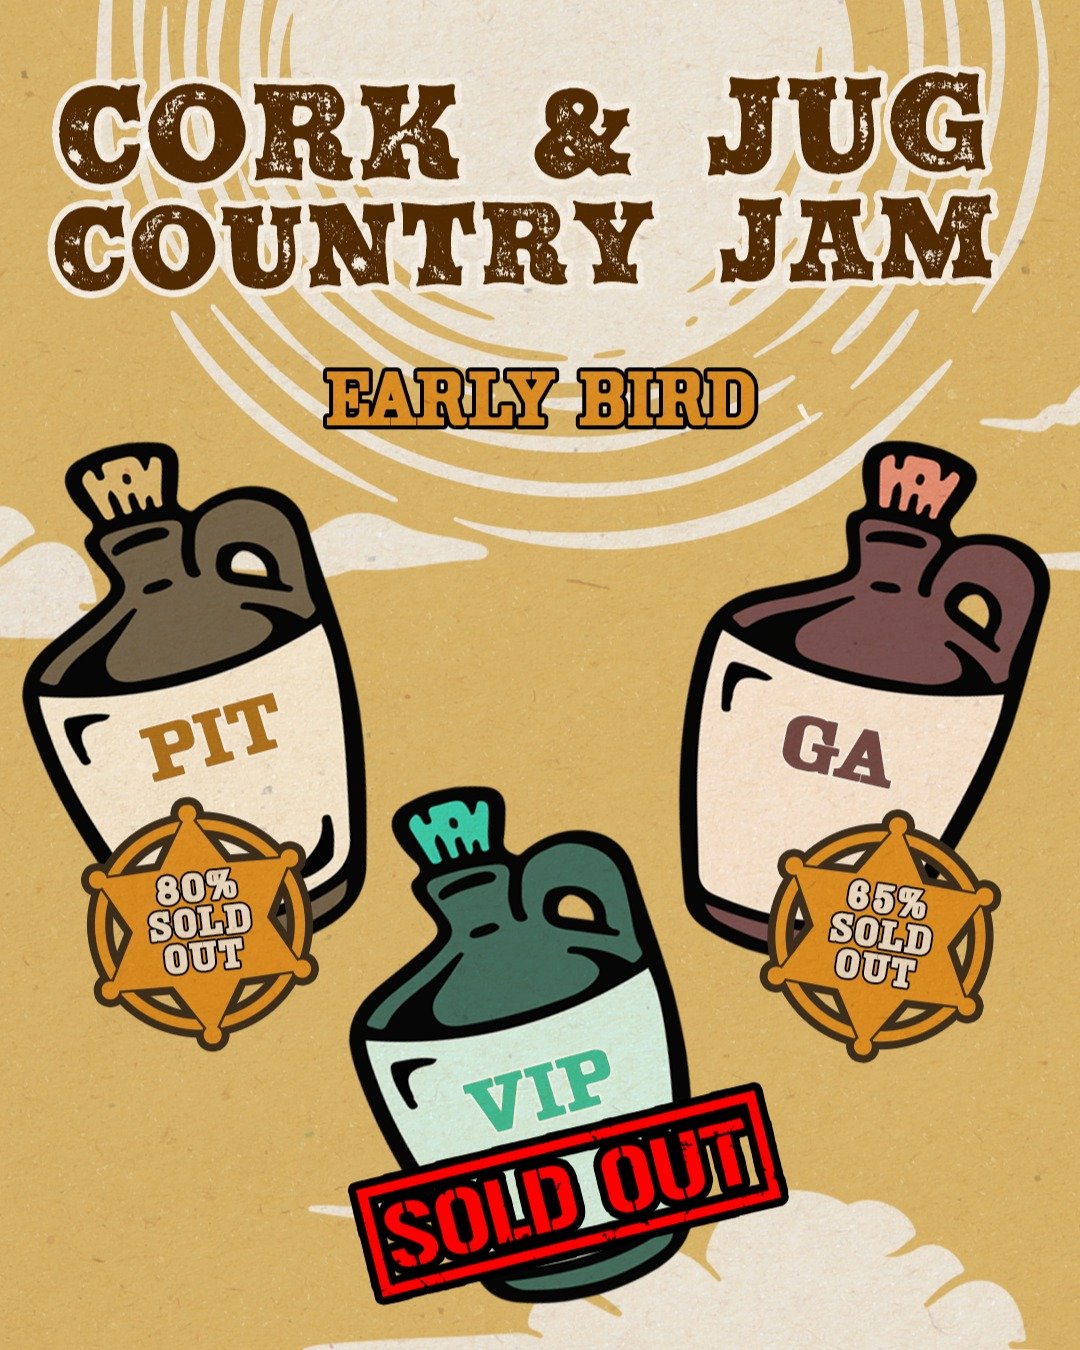 Early bird gets the worm! Early Bird VIP tickets are sold out, and limited PIT and GA tickets remain! Lock-in your entry and purchase your tickets now. 🍻🎻

🎵 @midland | @thetanyatucker | @buffaloco | @stephen.wilson.jr | @jadejacksonband | @joeand